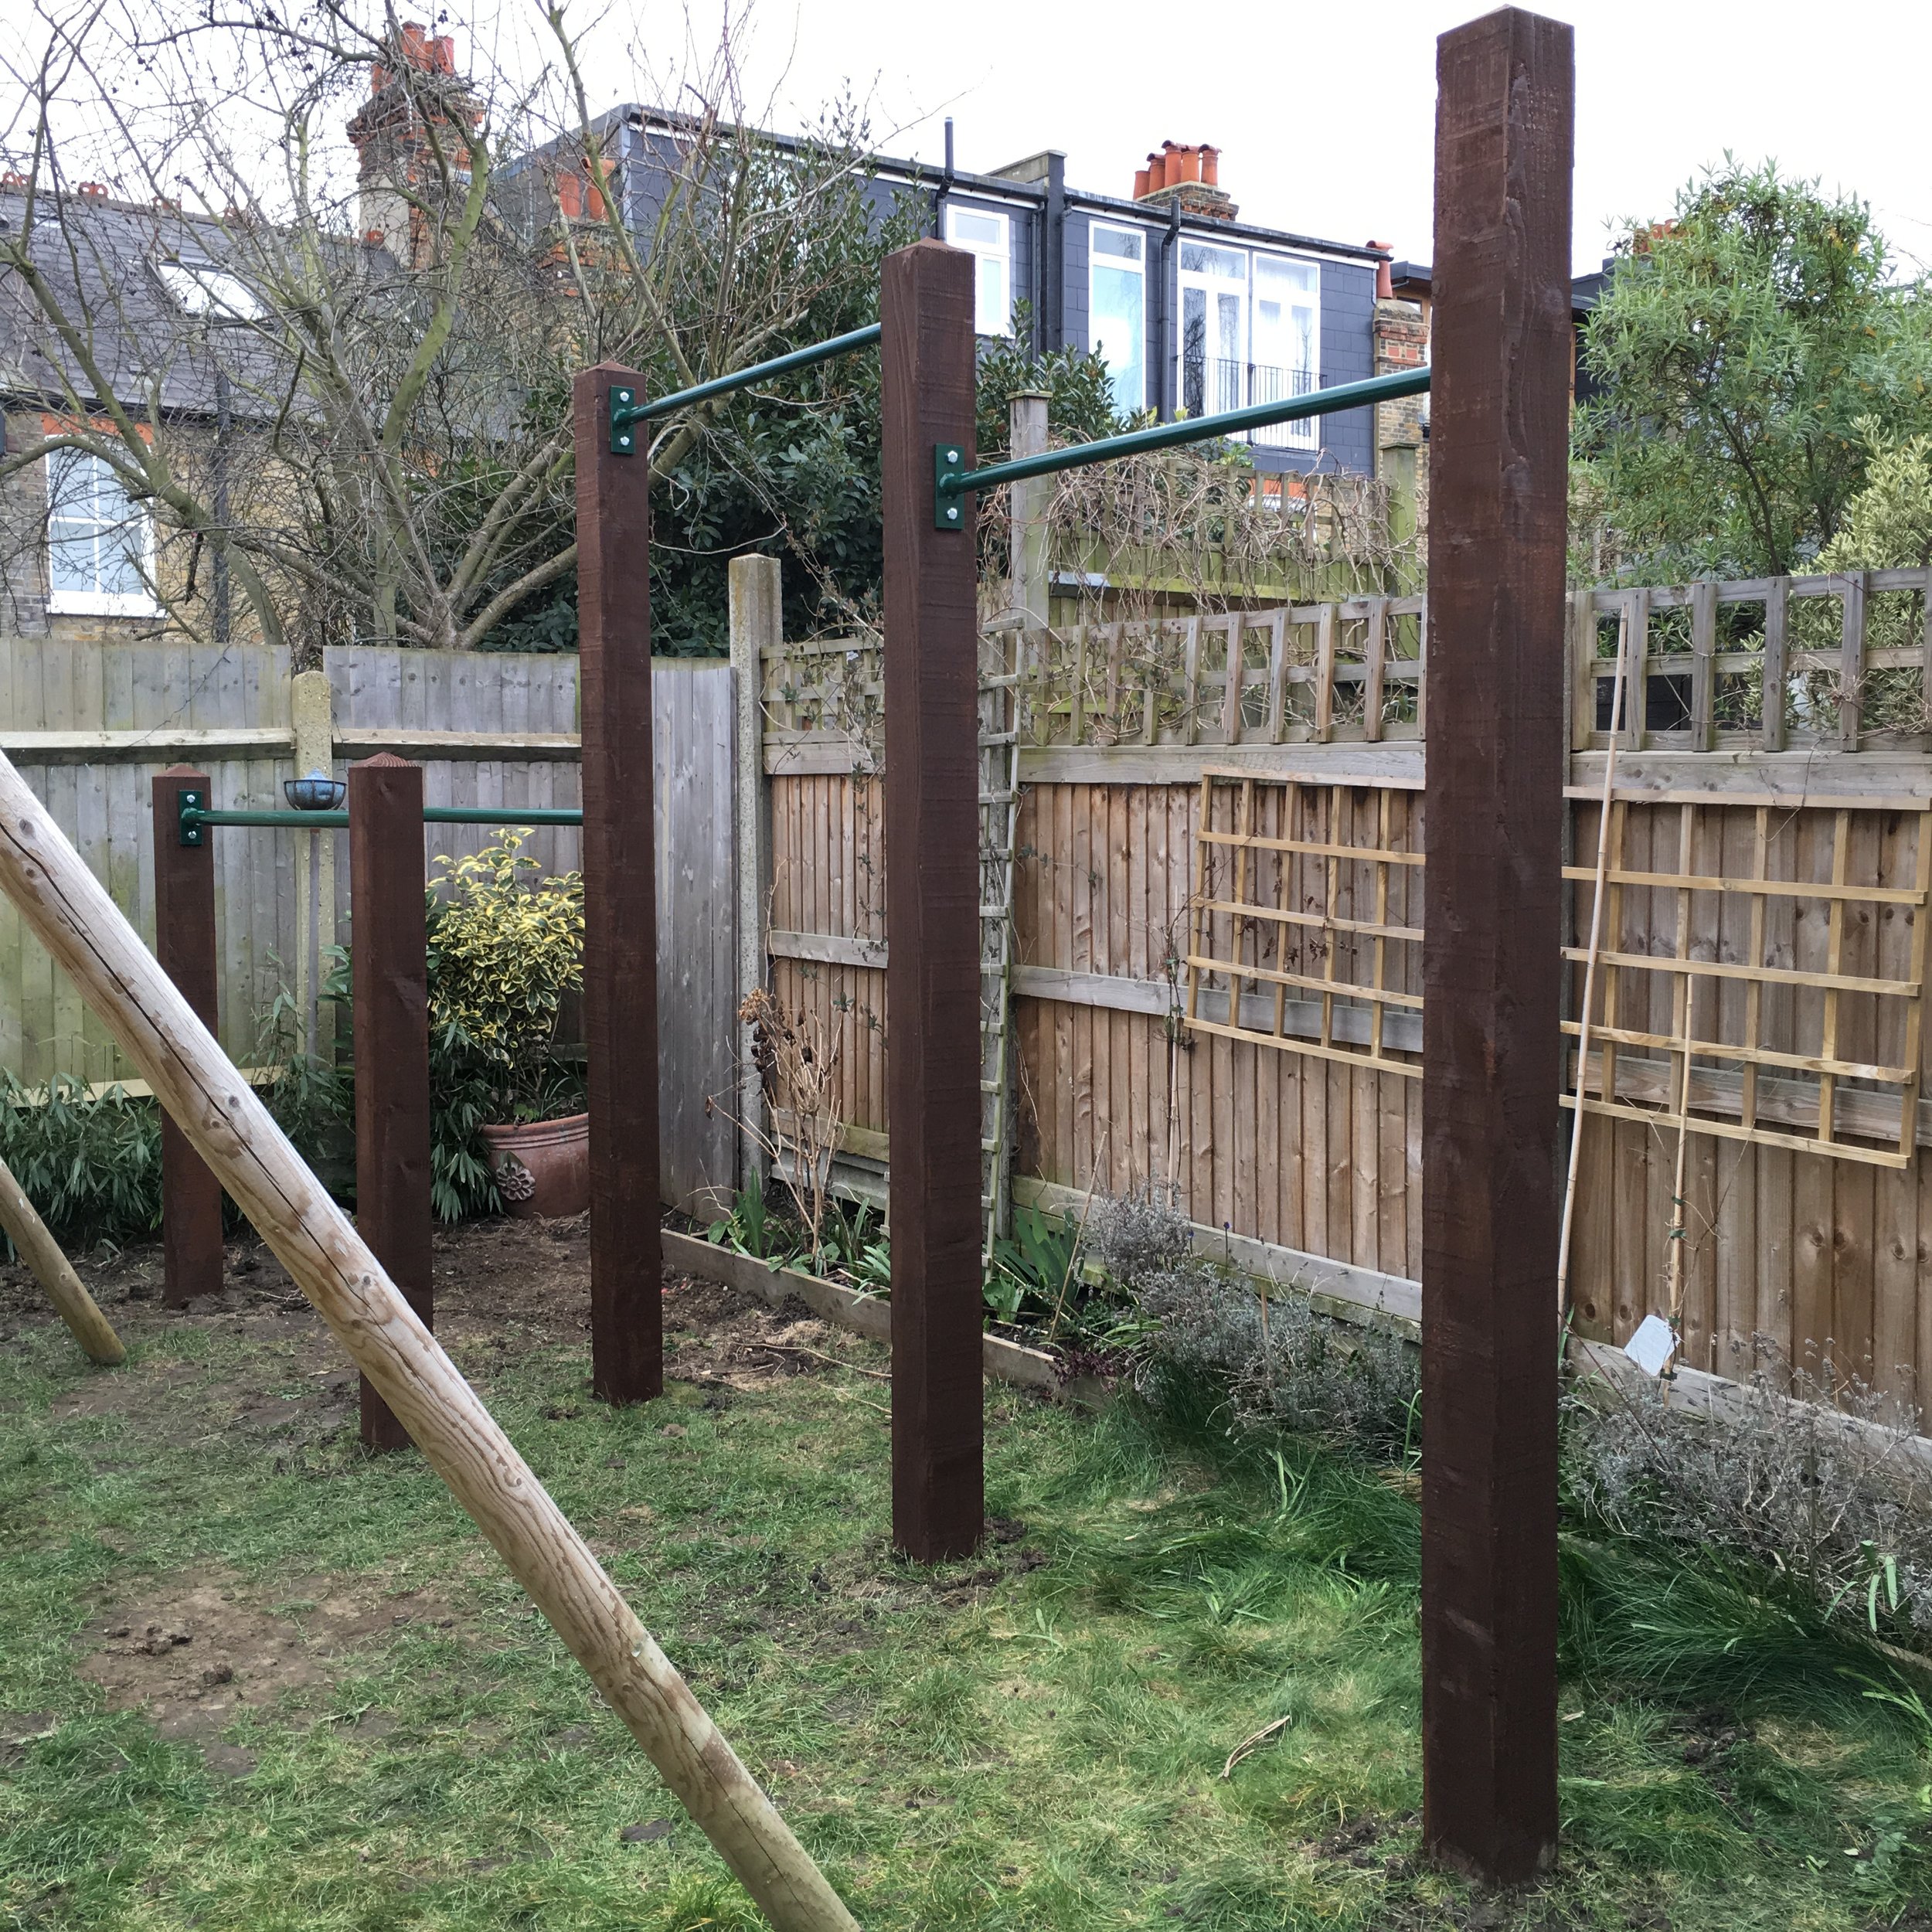 005 2016 garden double pull up bar and dip bars installation.JPG